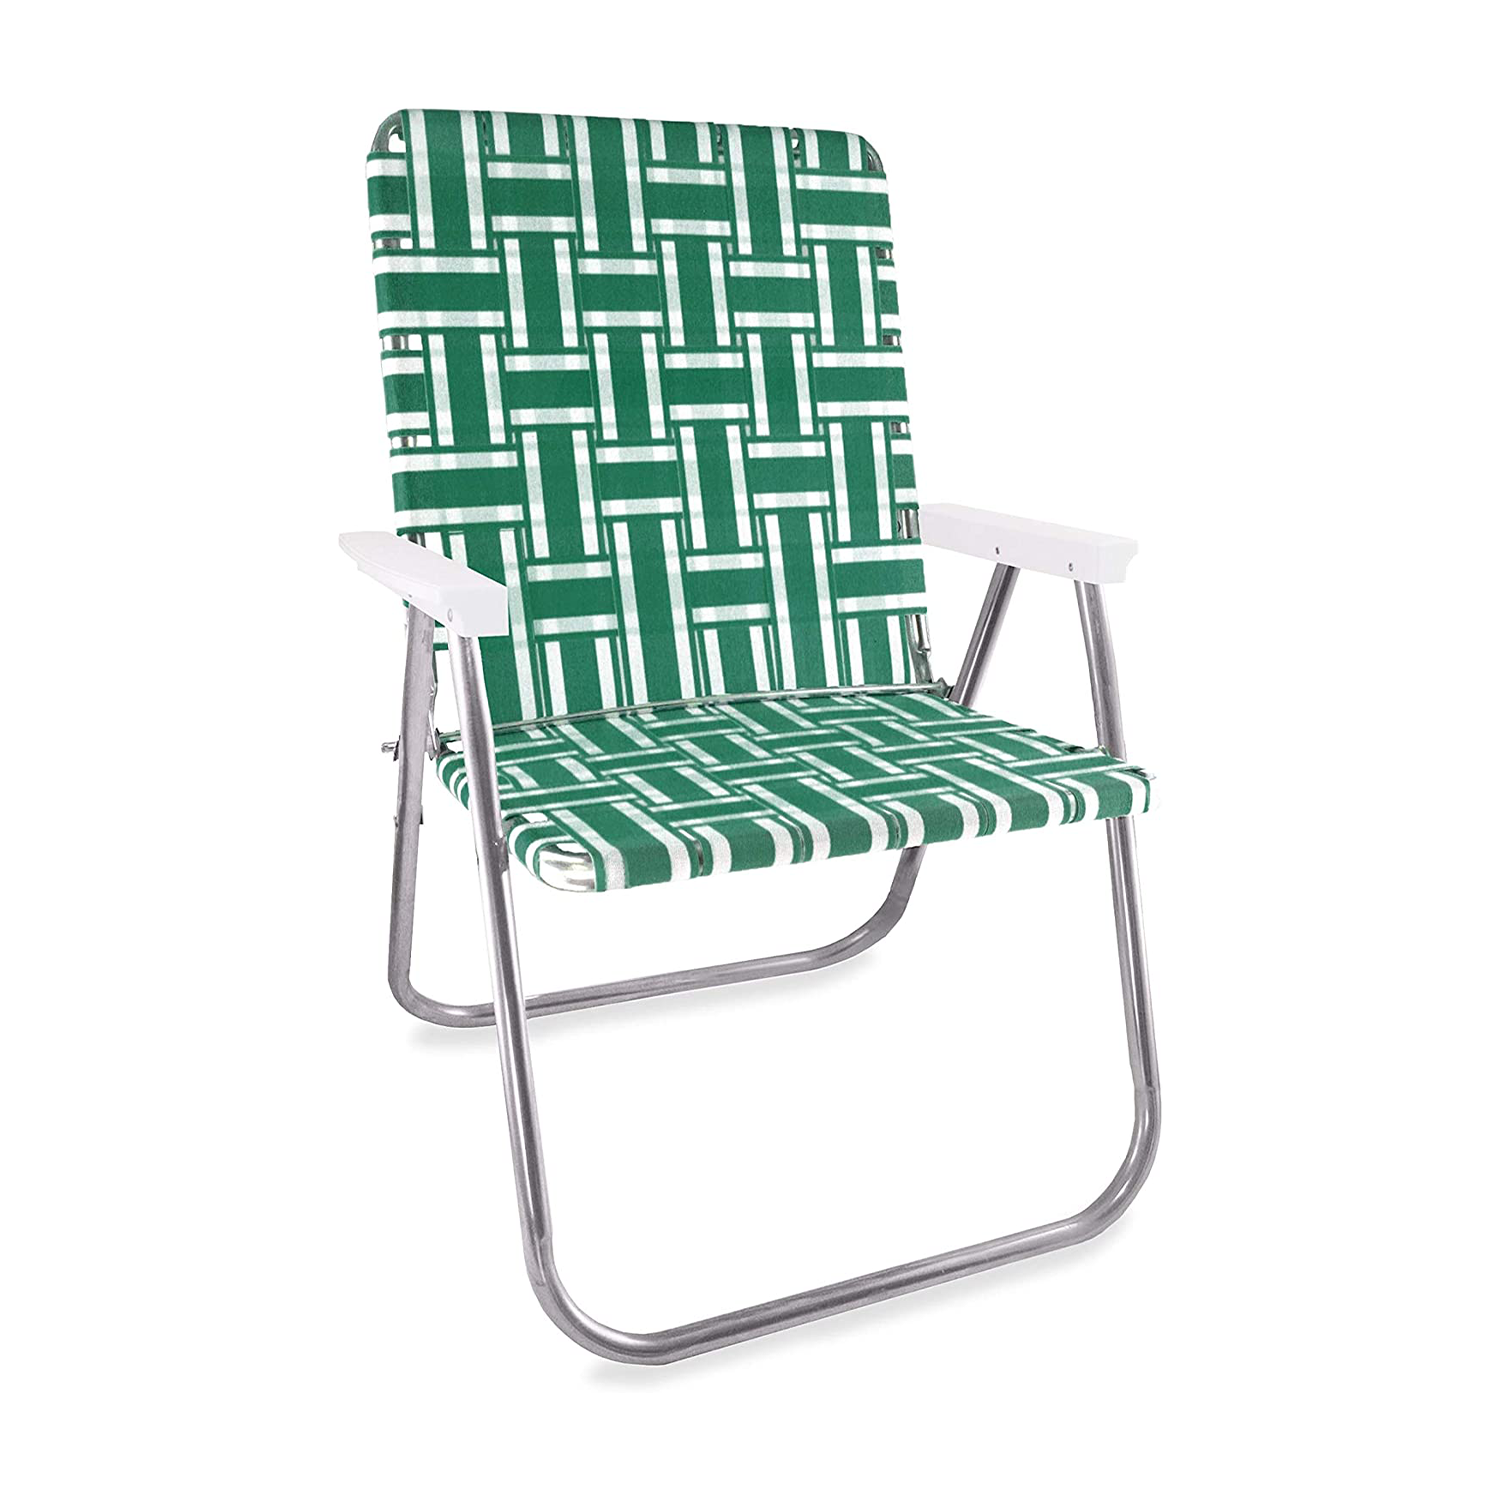 Lawn Chair USA Magnum in Green and White